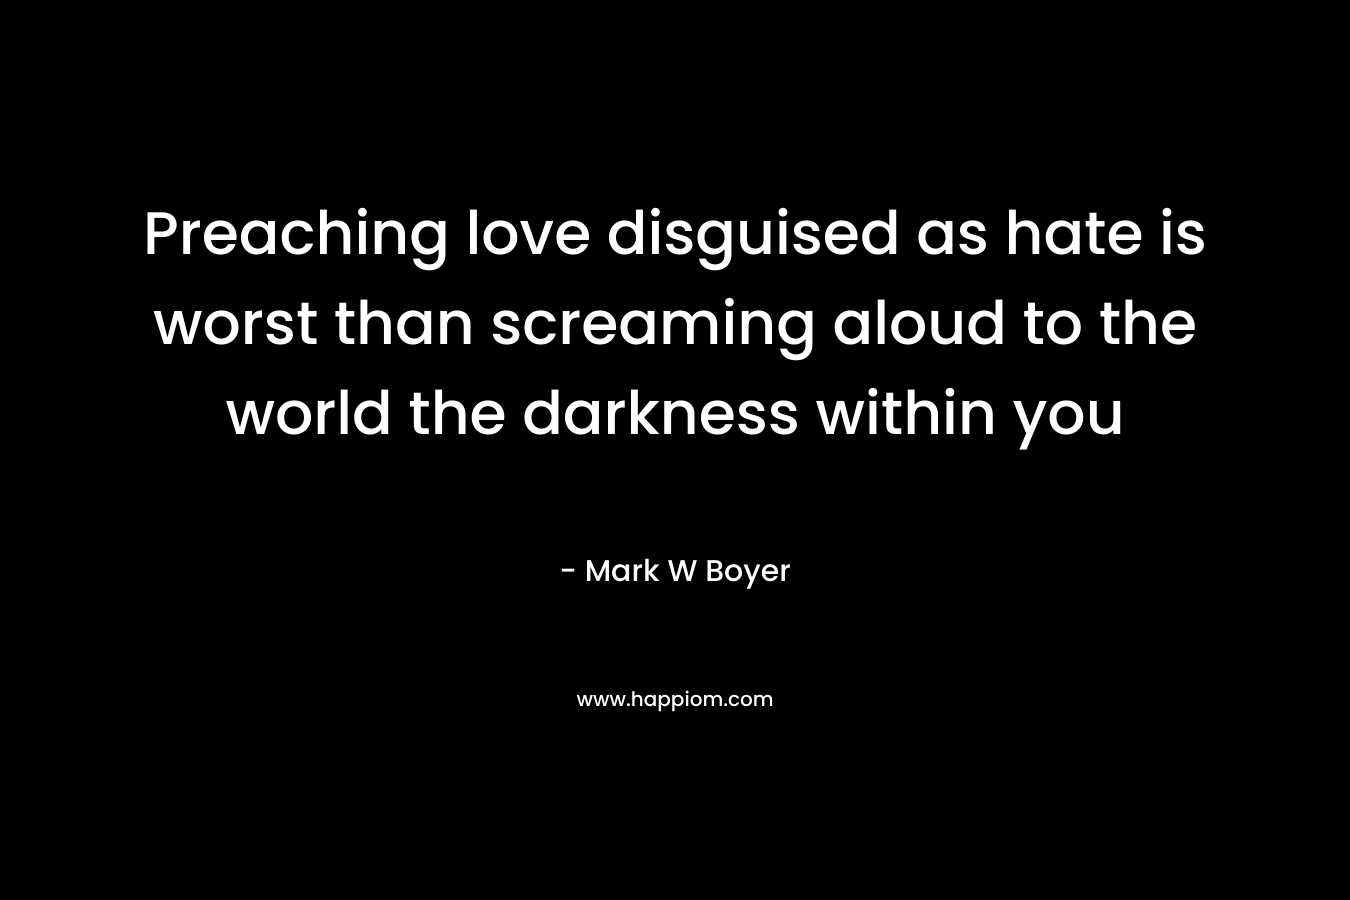 Preaching love disguised as hate is worst than screaming aloud to the world the darkness within you